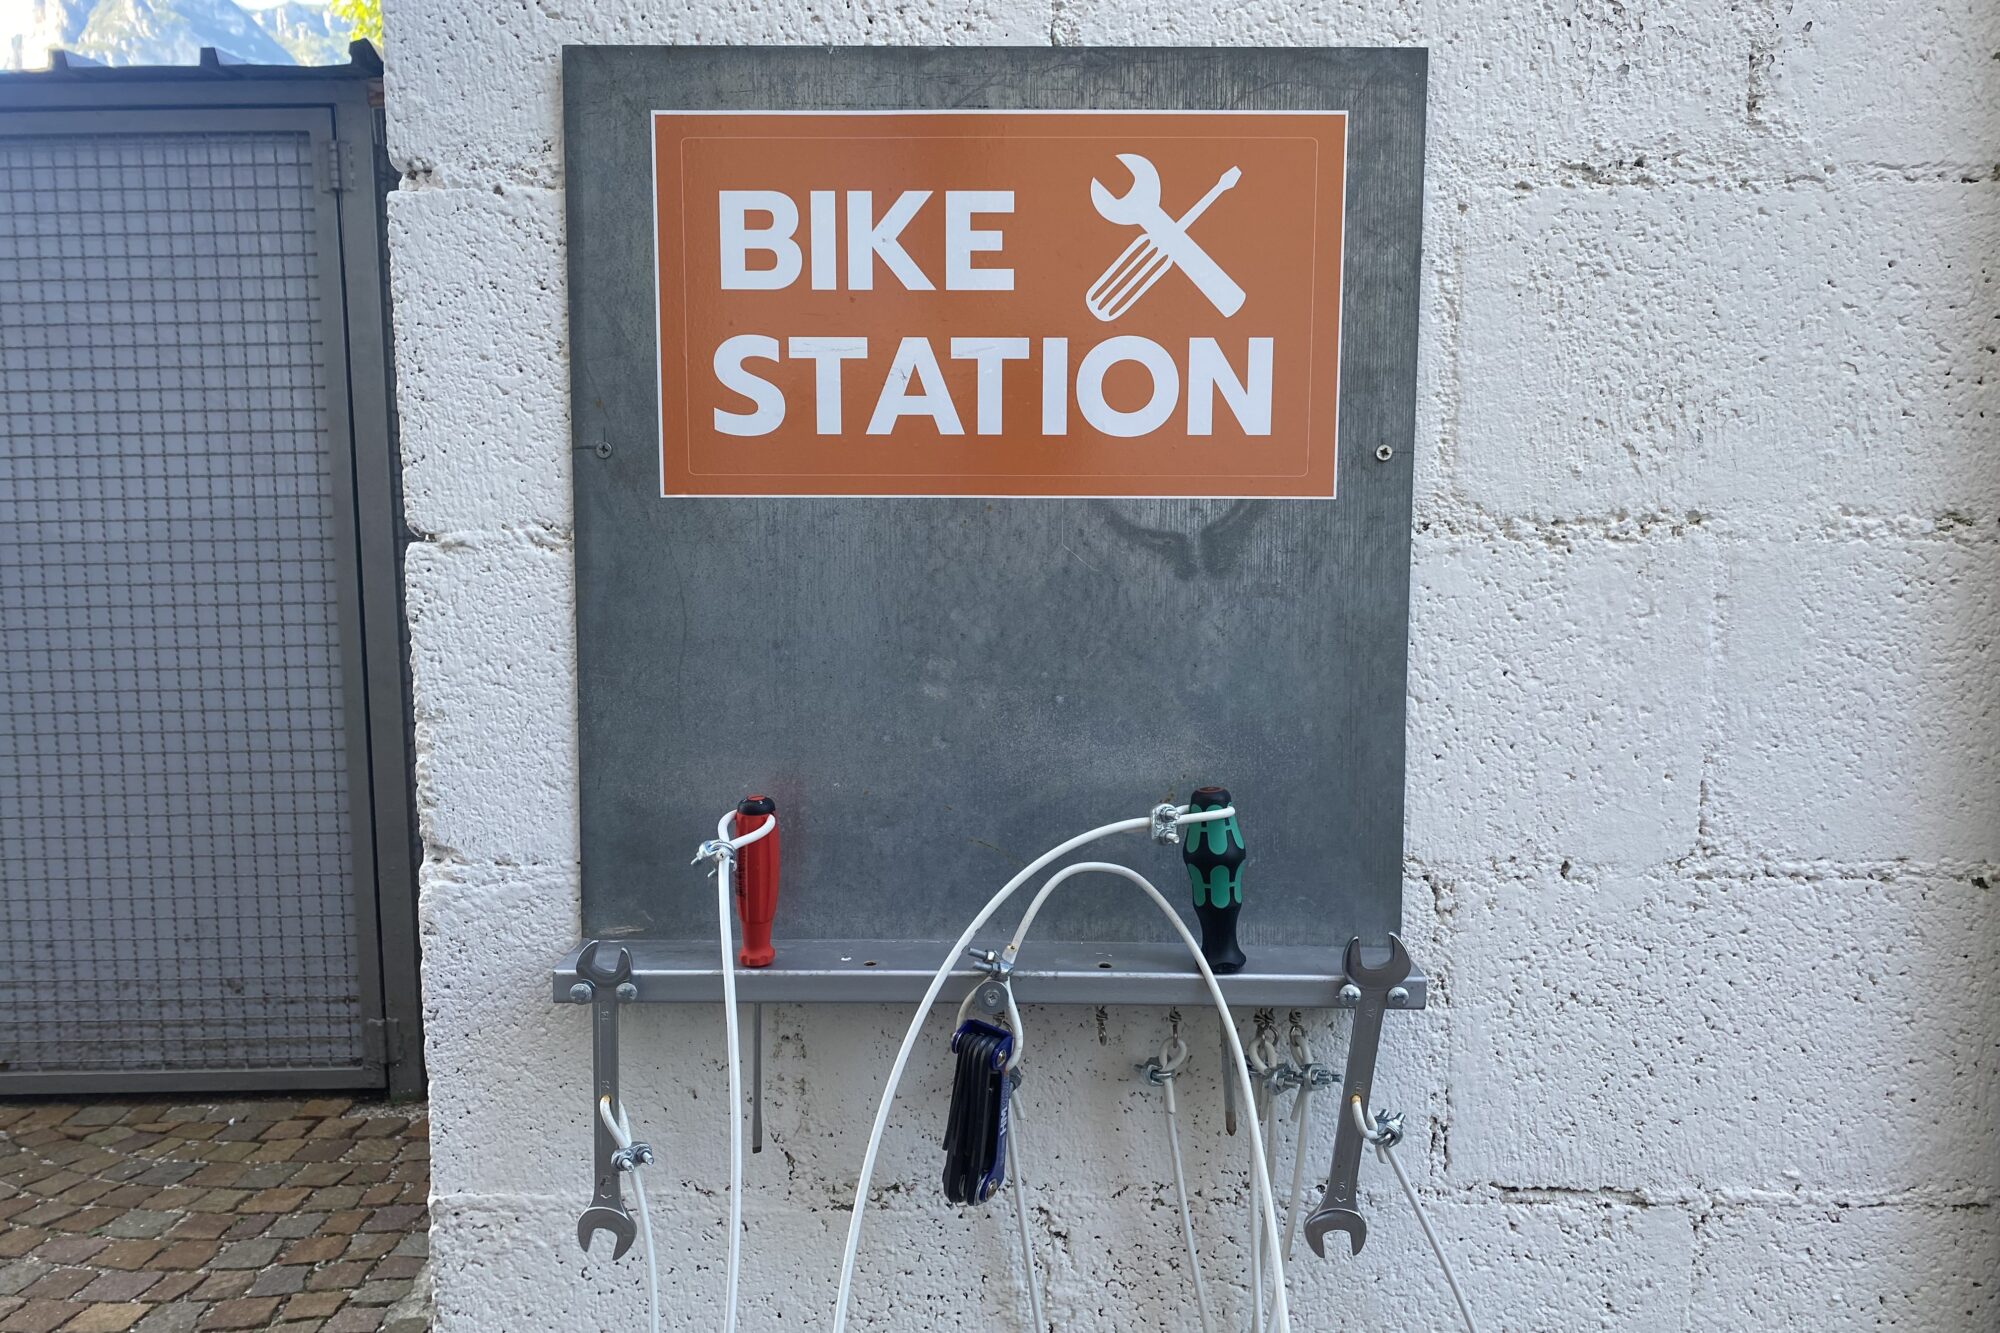 Bicycle storage area